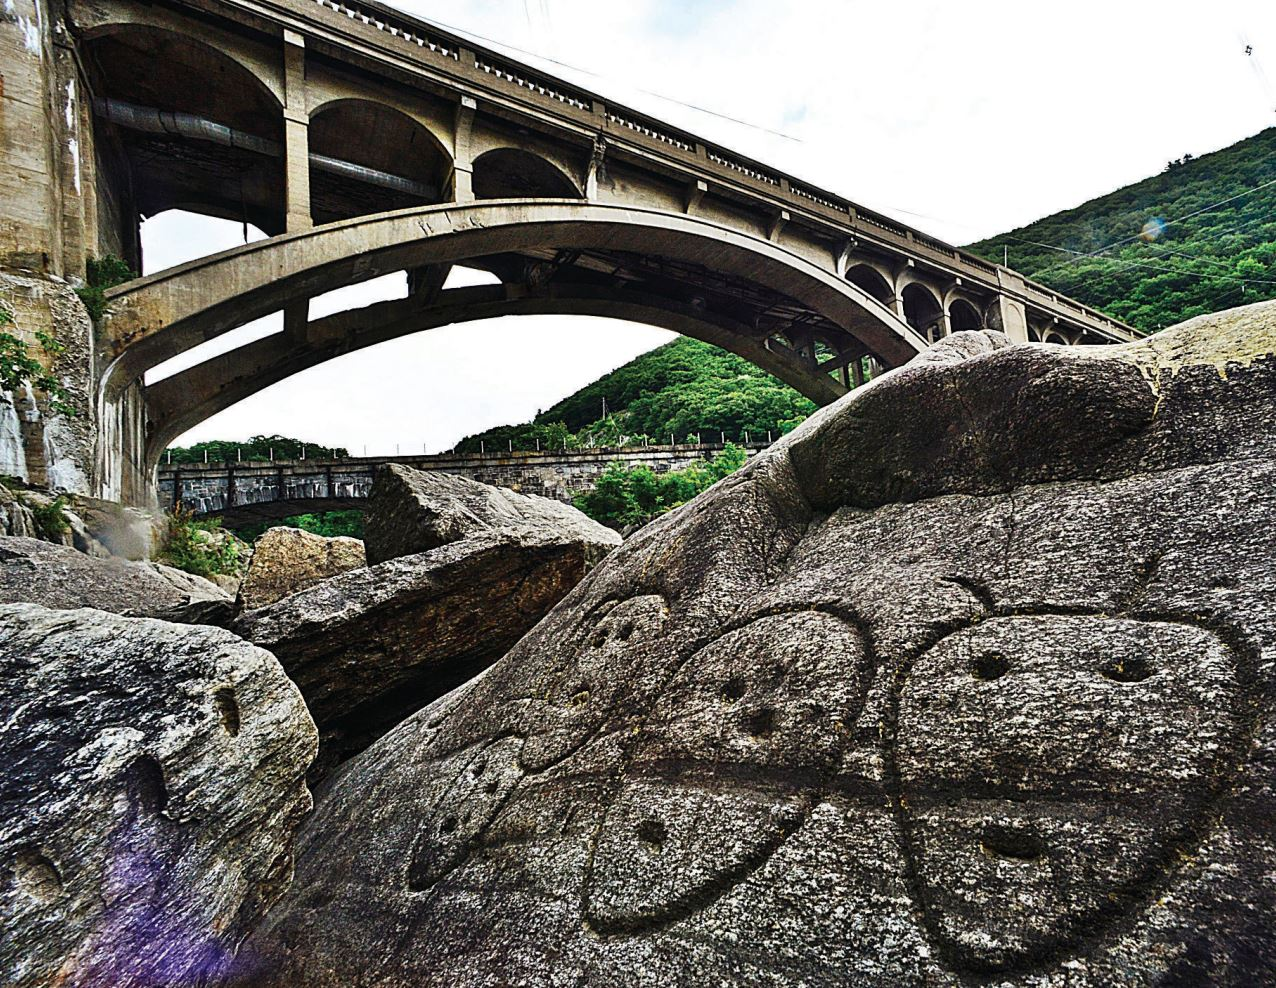 Rocks with carvings on them in foreground; bridge in background